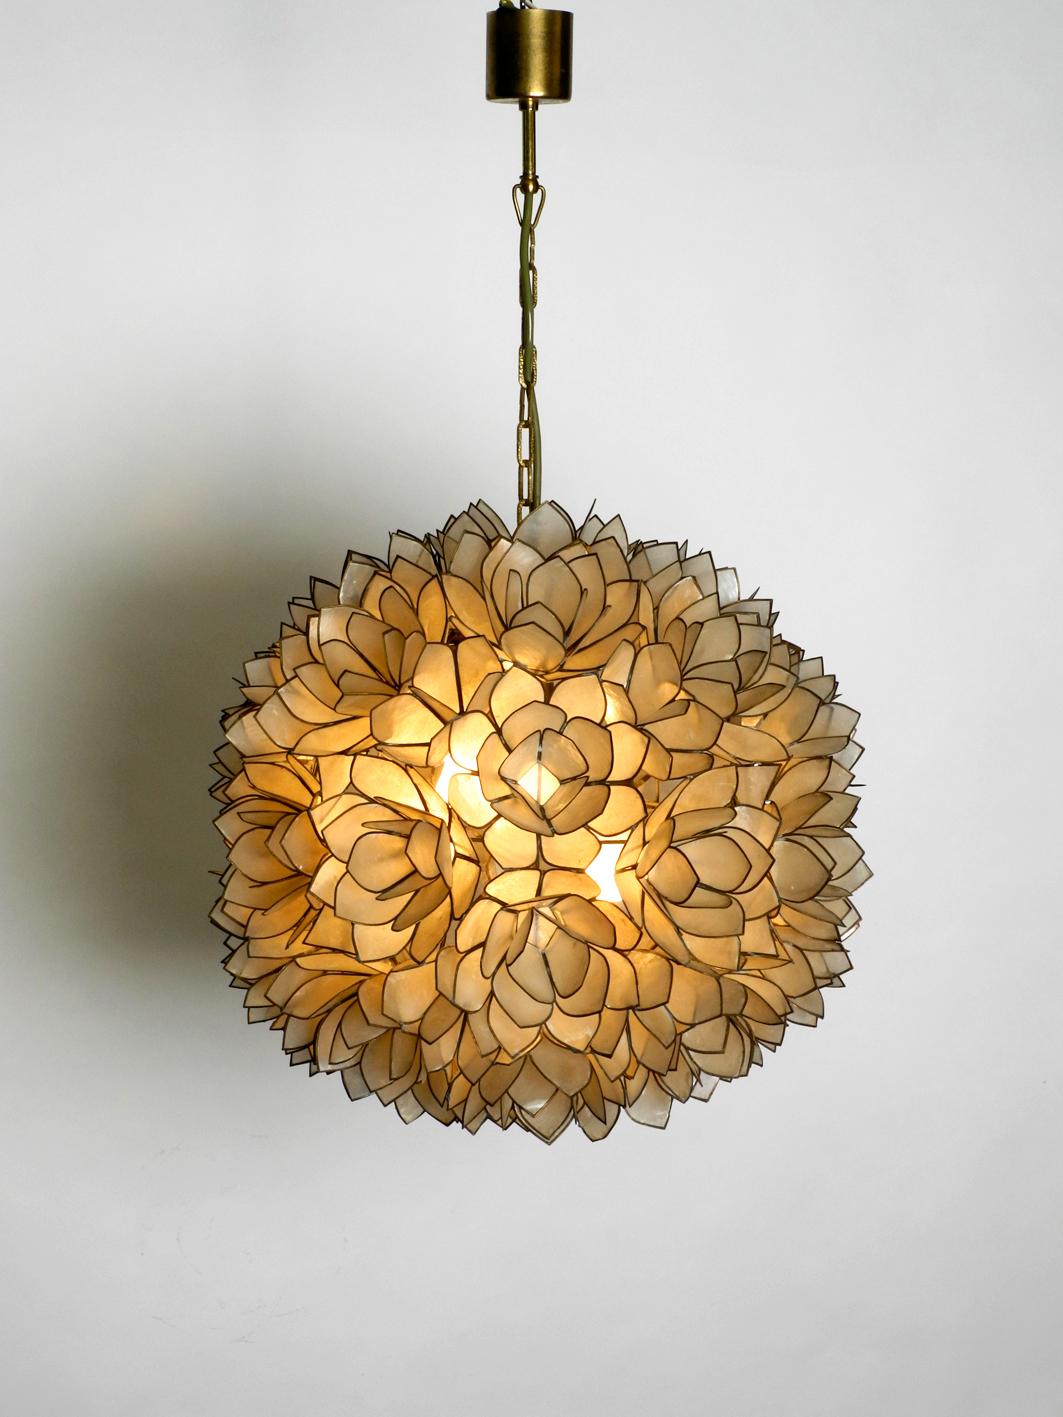 Very elegant flower pendant lamp in spherical shape made of mother of pearl. Great rare design of the 1970s. Very high quality workmanship.
Metal frame is hung on a brass chain and brass canopy. Two E27 sockets for pleasant lighting.
No damages to